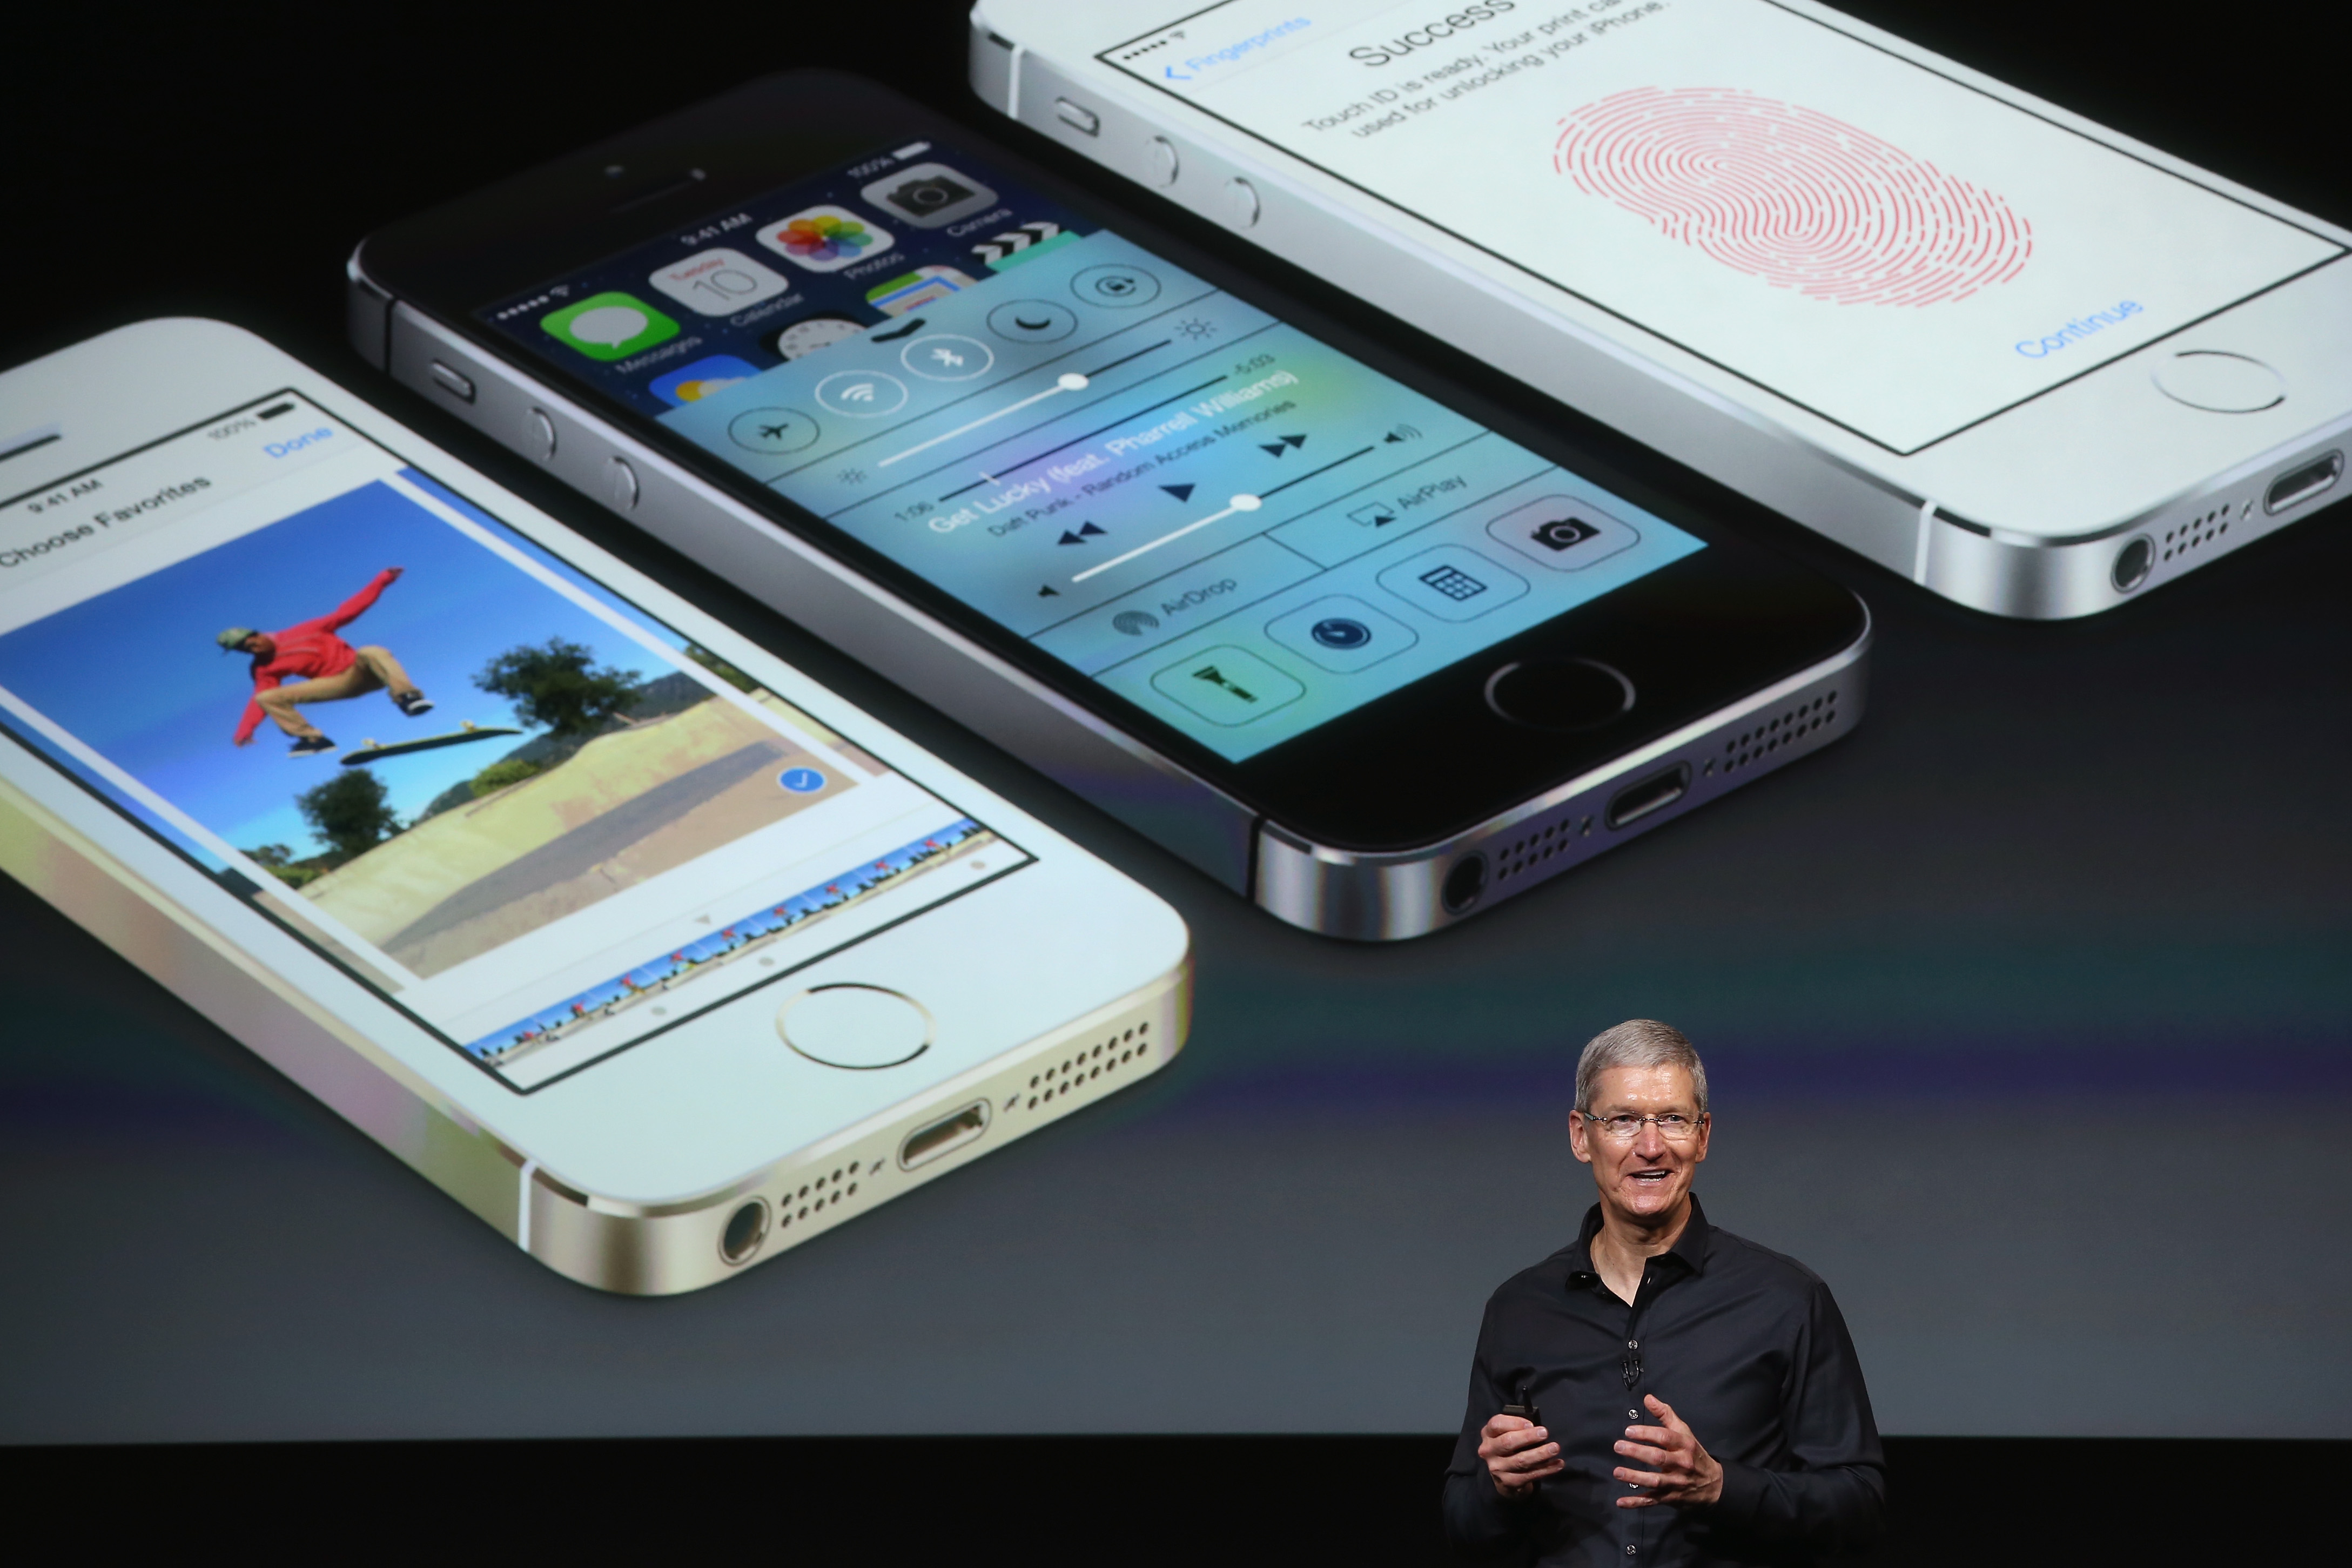 Apple CEO Tim Cook speaks about the new iPhone during an Apple product announcement at the Apple campus in Cupertino, Calif., on Sept. 10, 2013 (Justin Sullivan—Getty Images)